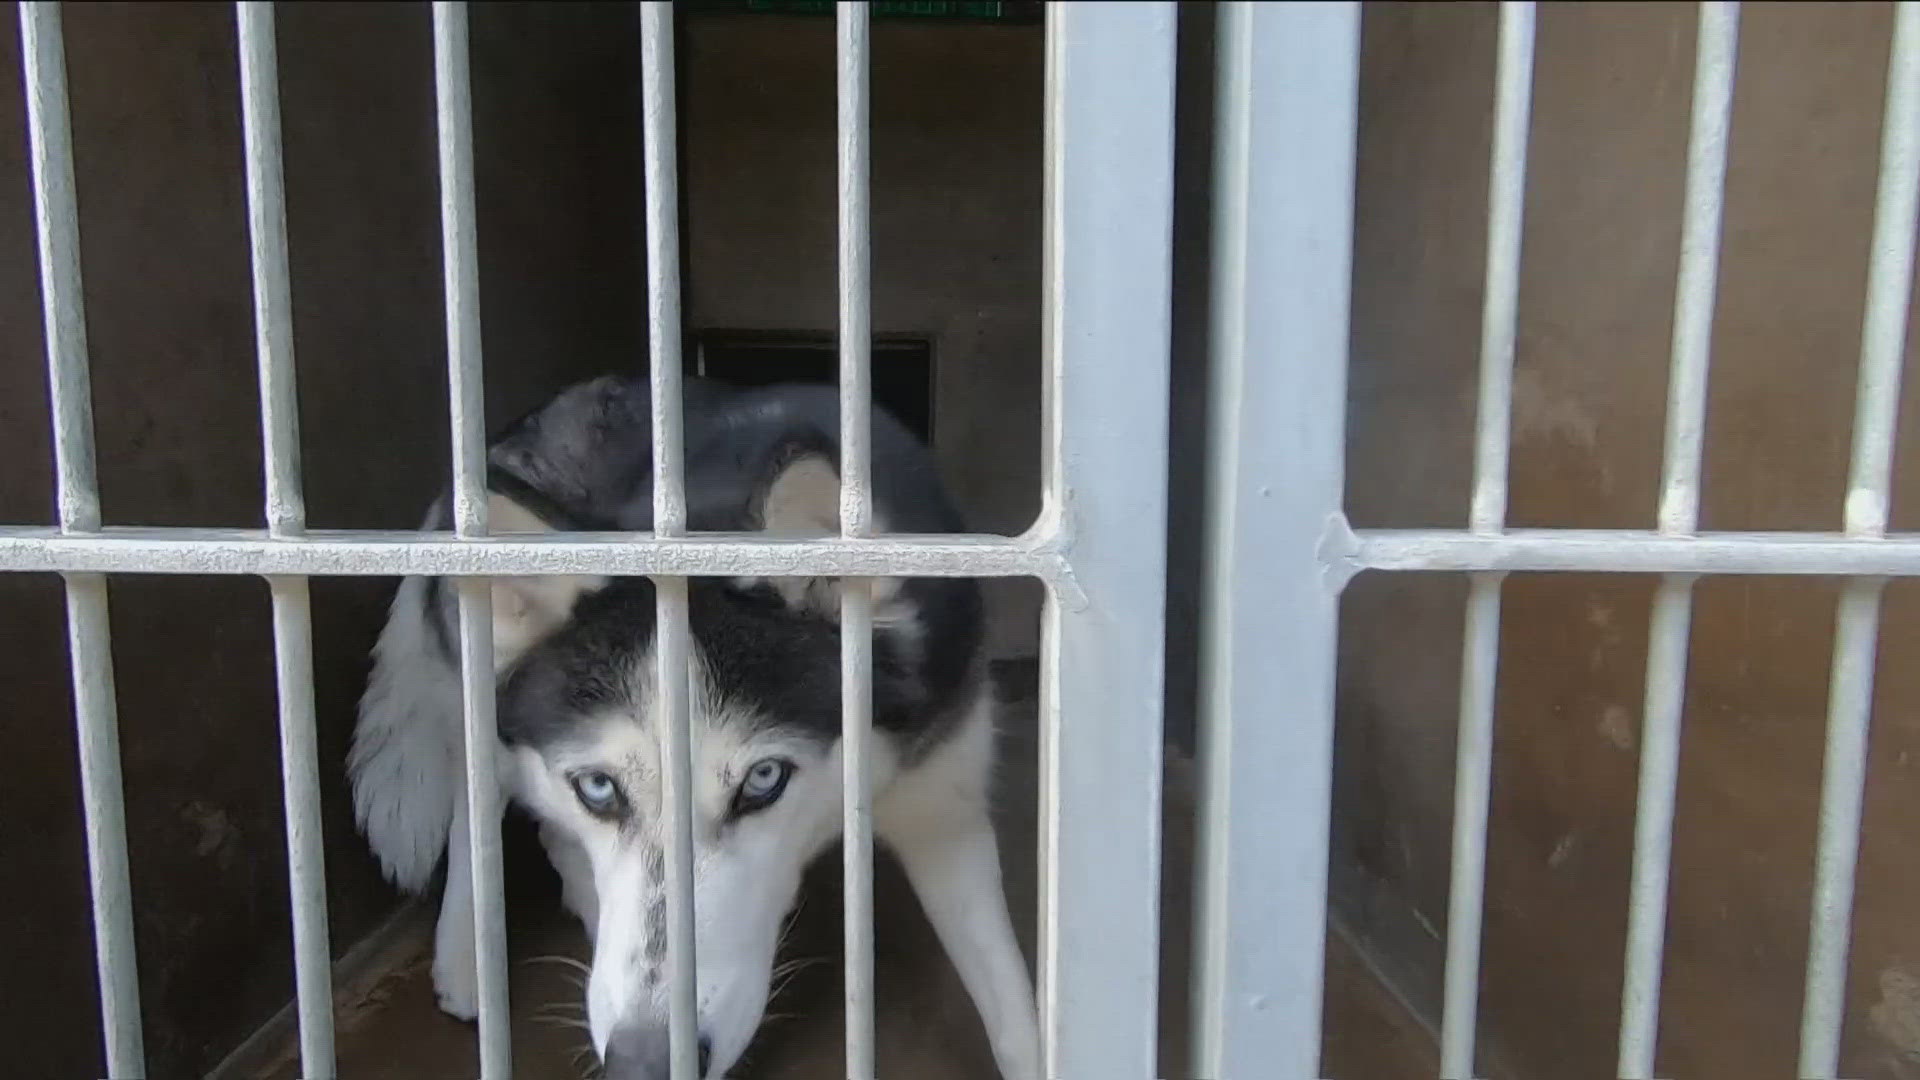 Chula Vista Animal Services says it's overwhelmed with the dramatic rise of the high-energy dogs in its care.